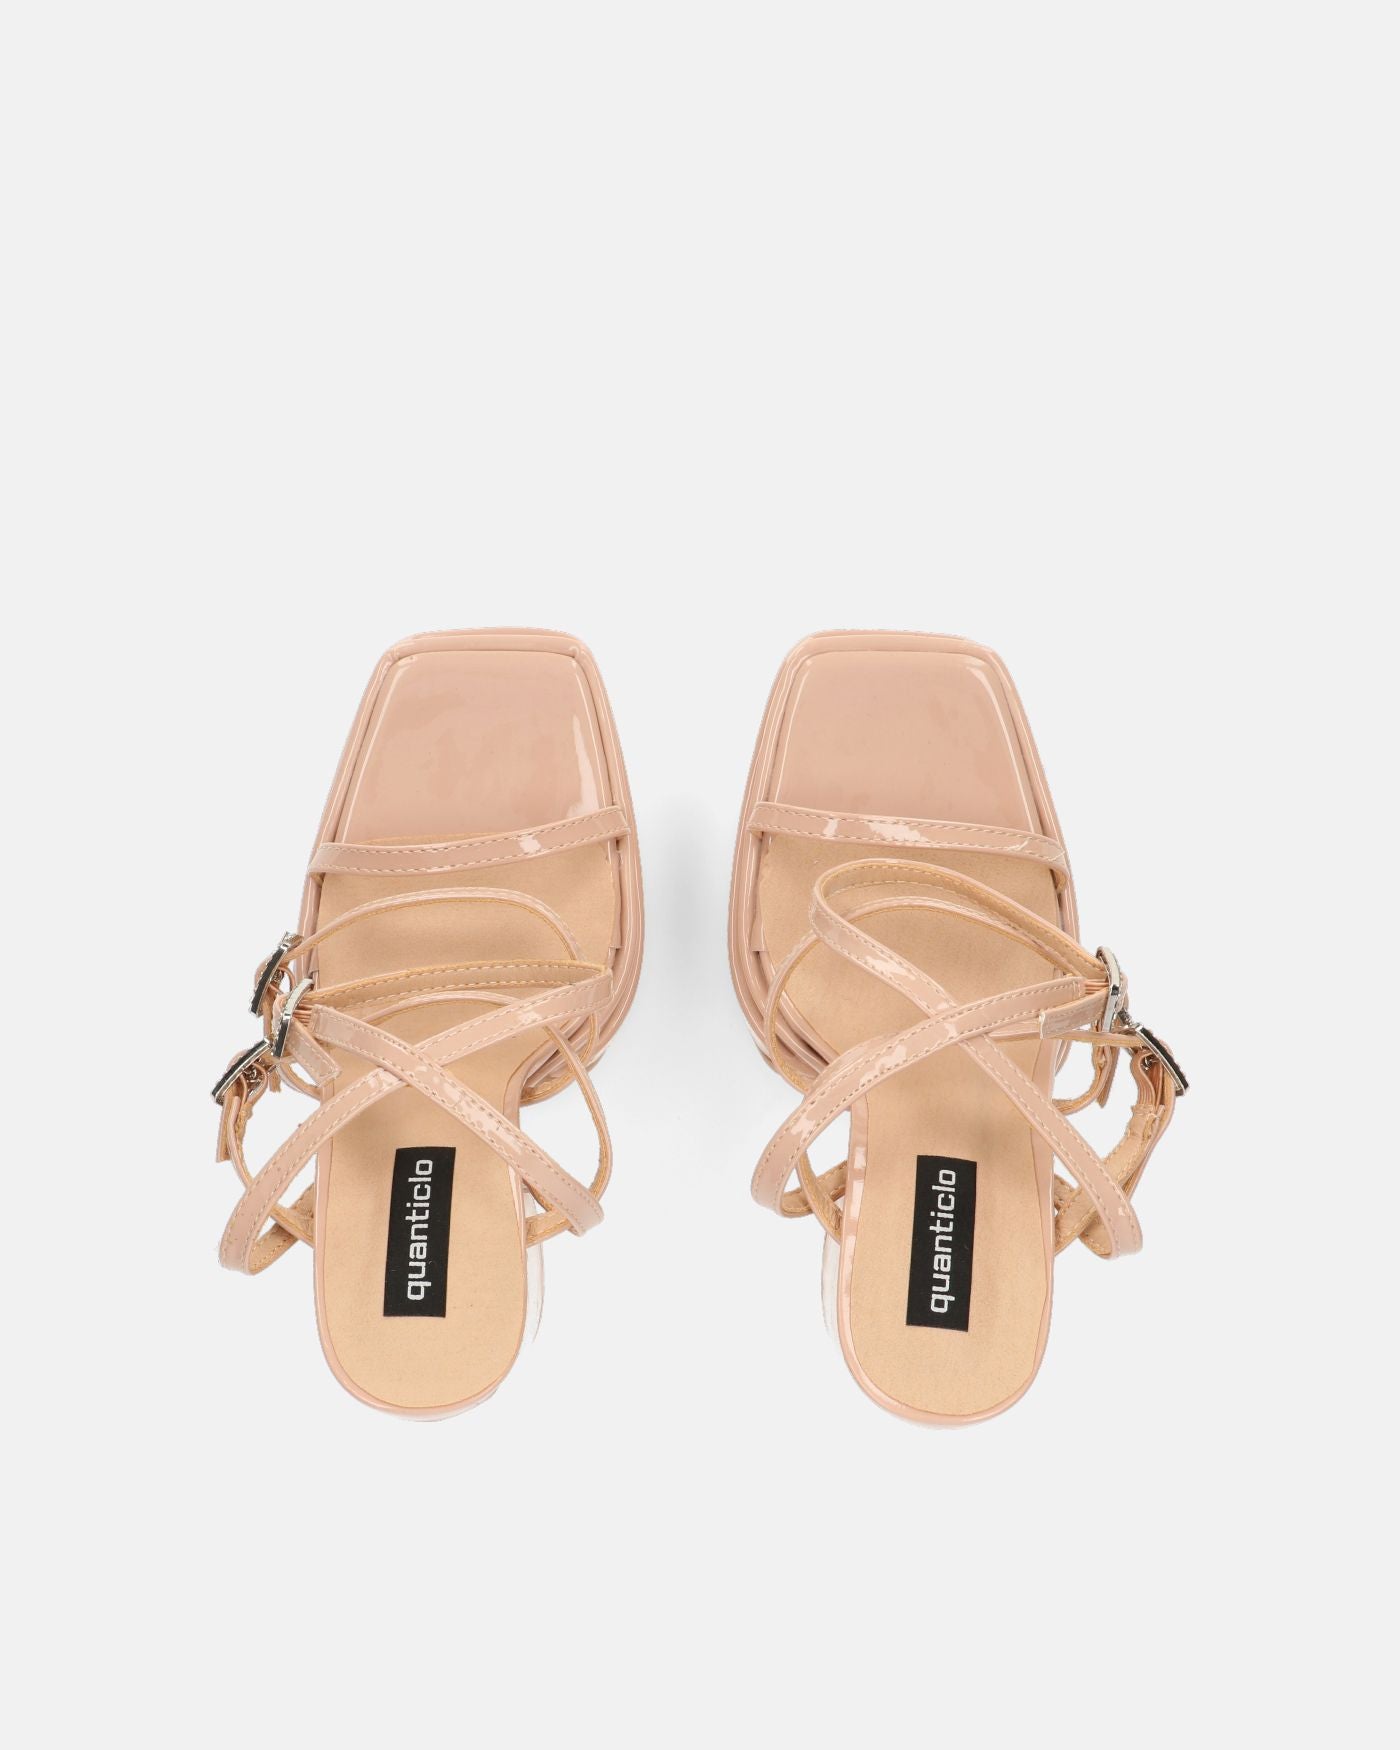 TEXA - sandals with strap and high heel in beige